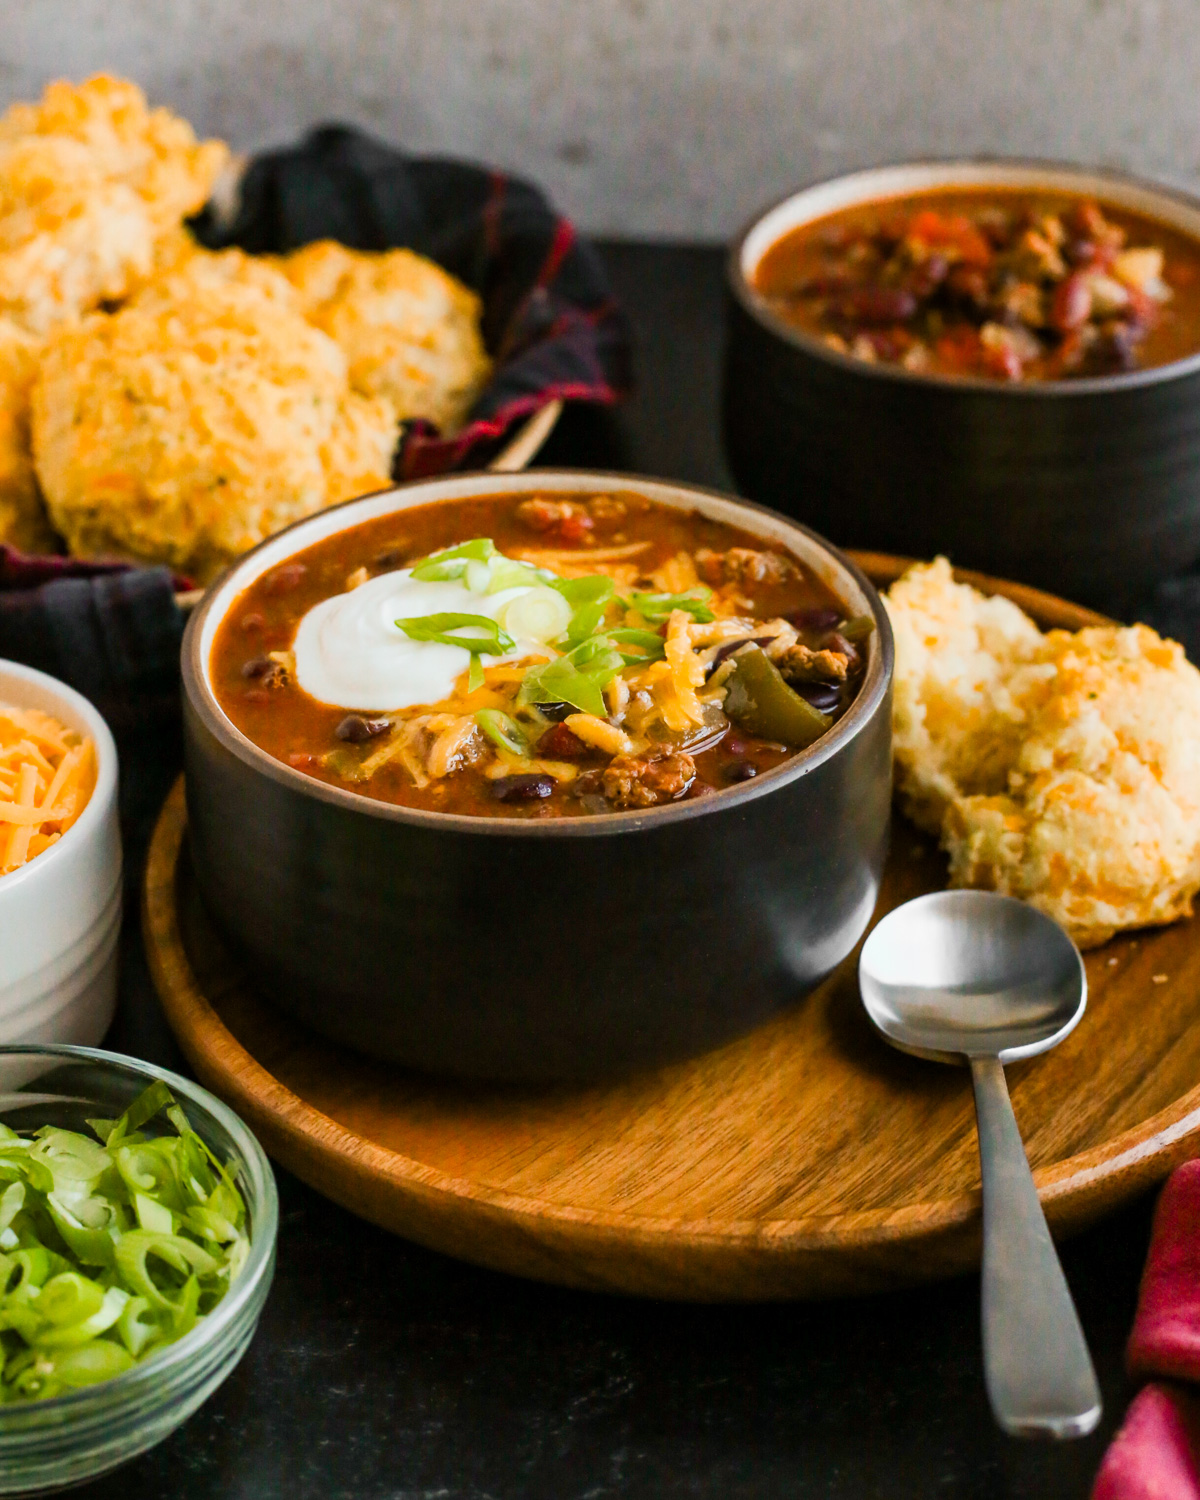 Styled image of a bowl of lamb chili, served in a kitchen scene with cheddar bay biscuits, shredded cheese, green onions, and a second bowl of chili in the background. The bowl in focus is topped with melted cheese, sour cream, and green onions and a soup spoon rests on the wooden plate it's served on